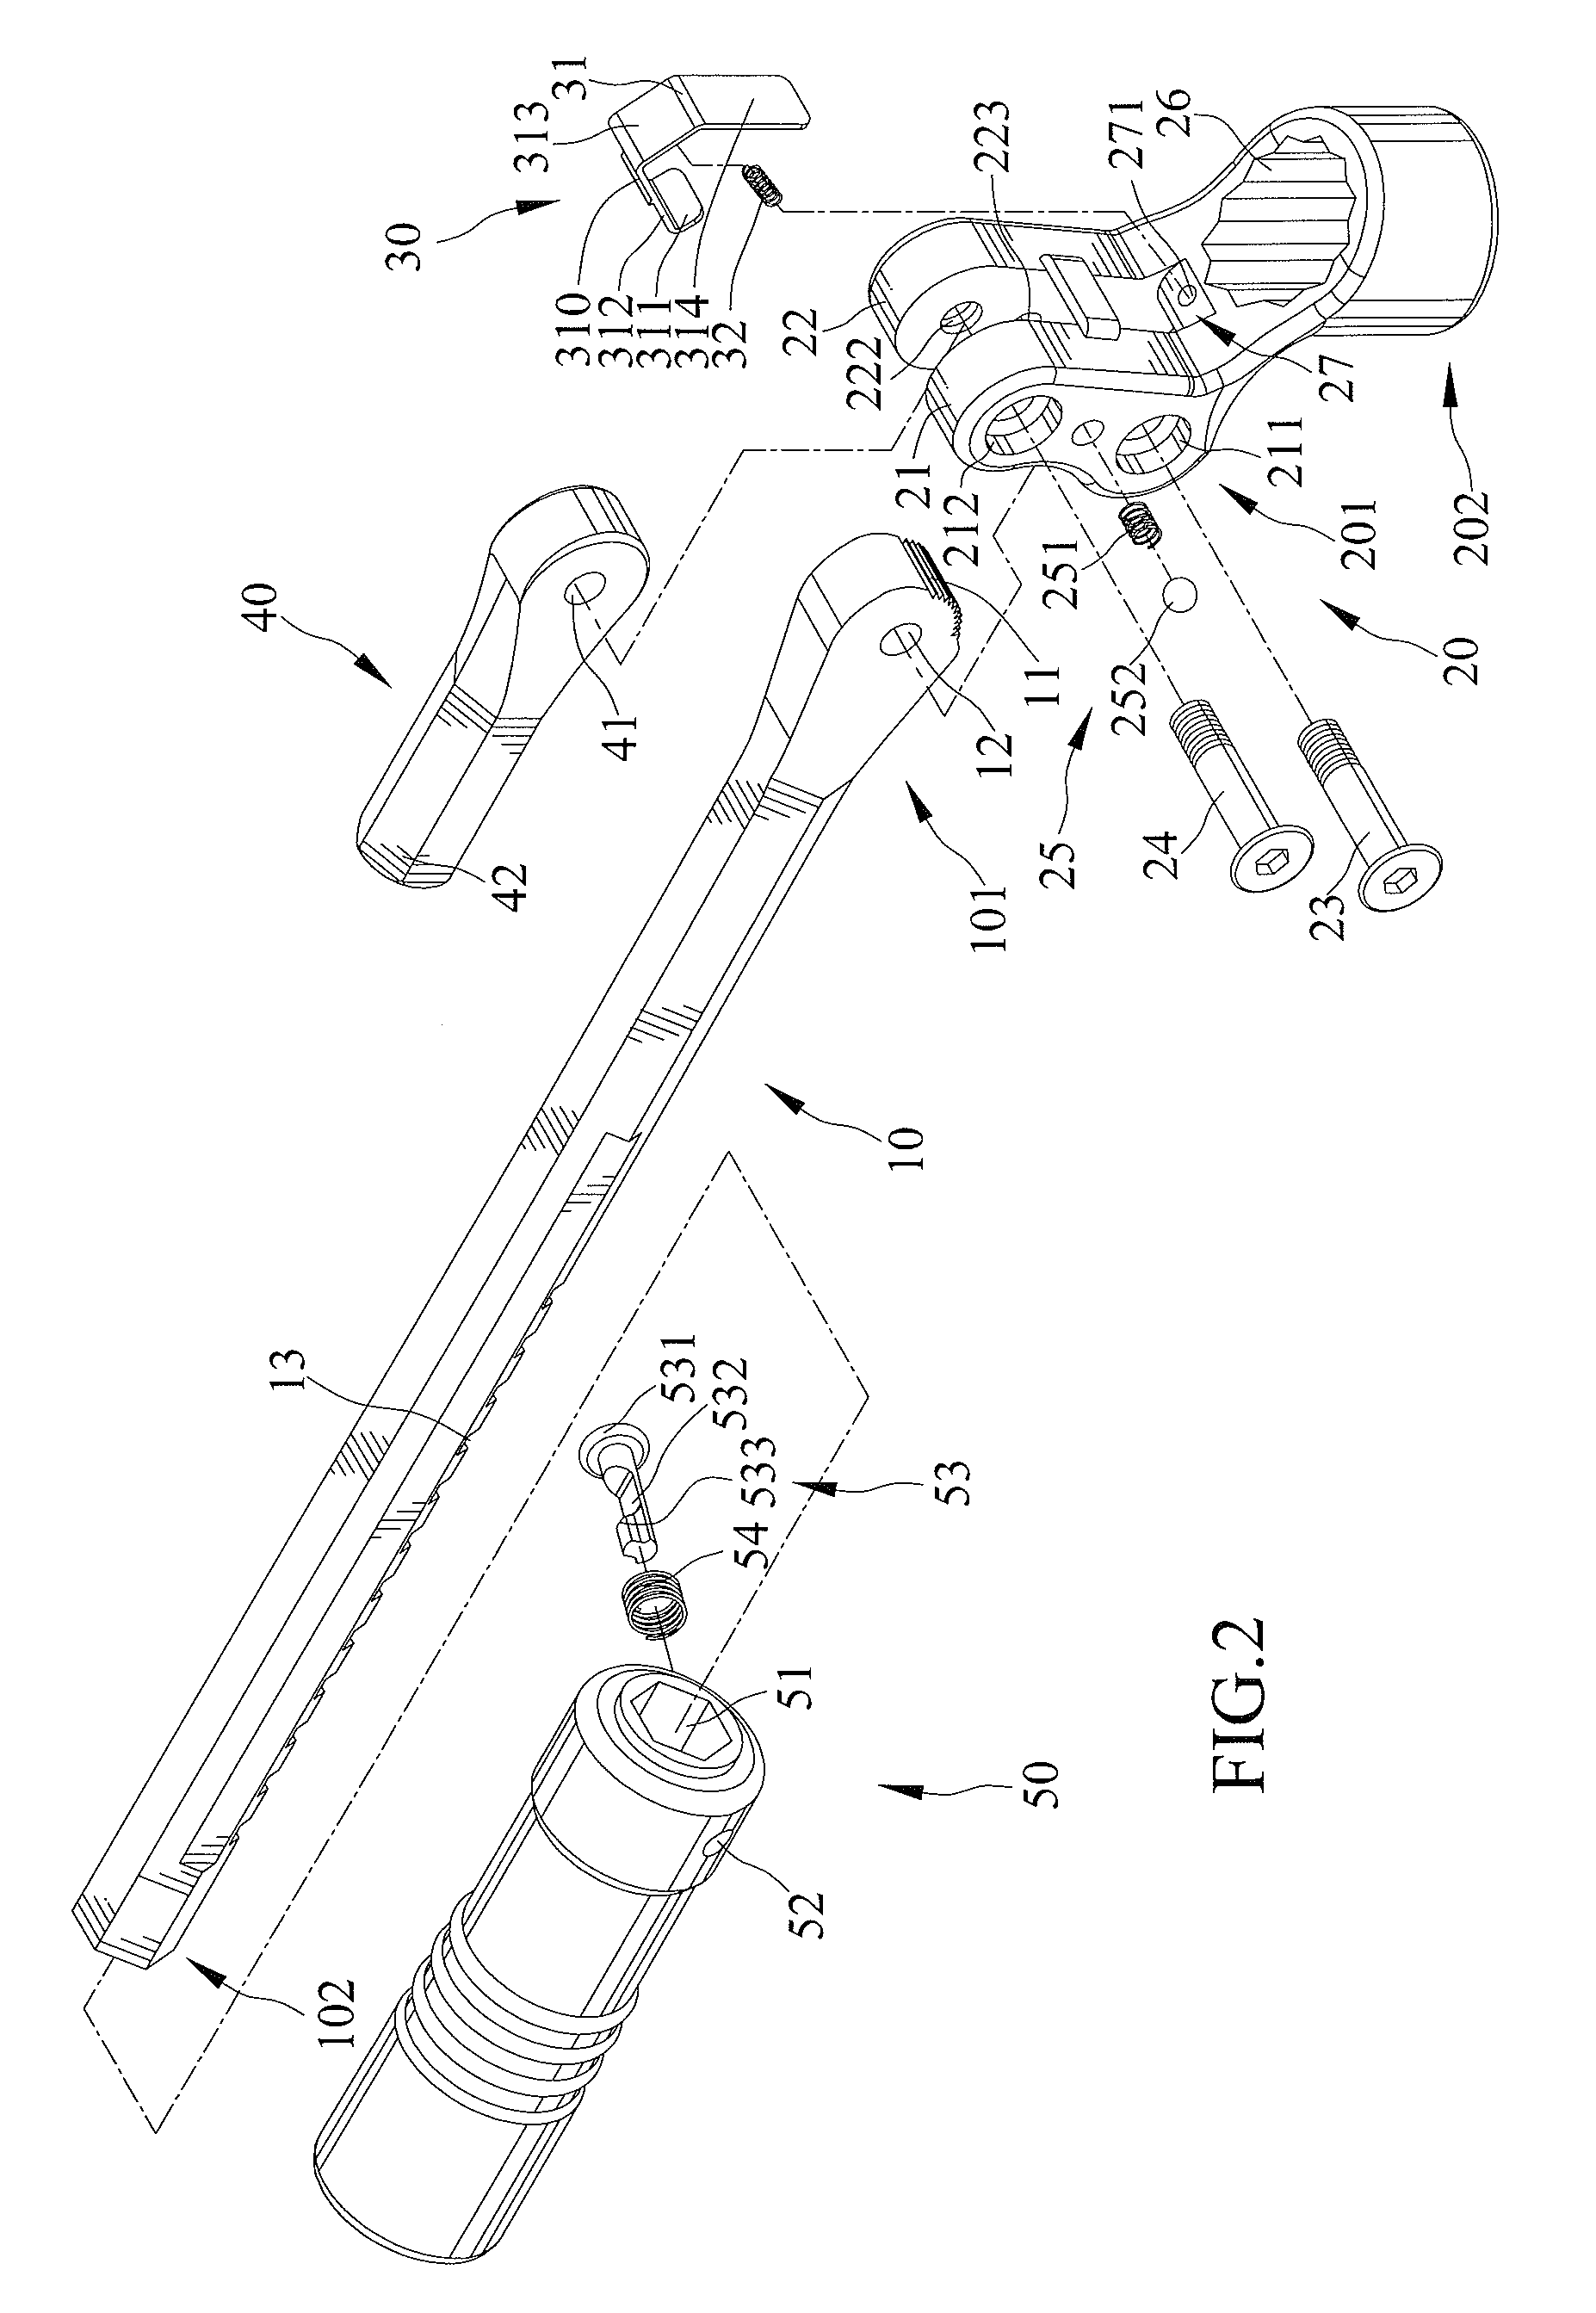 Tool with working heads and positioning unit